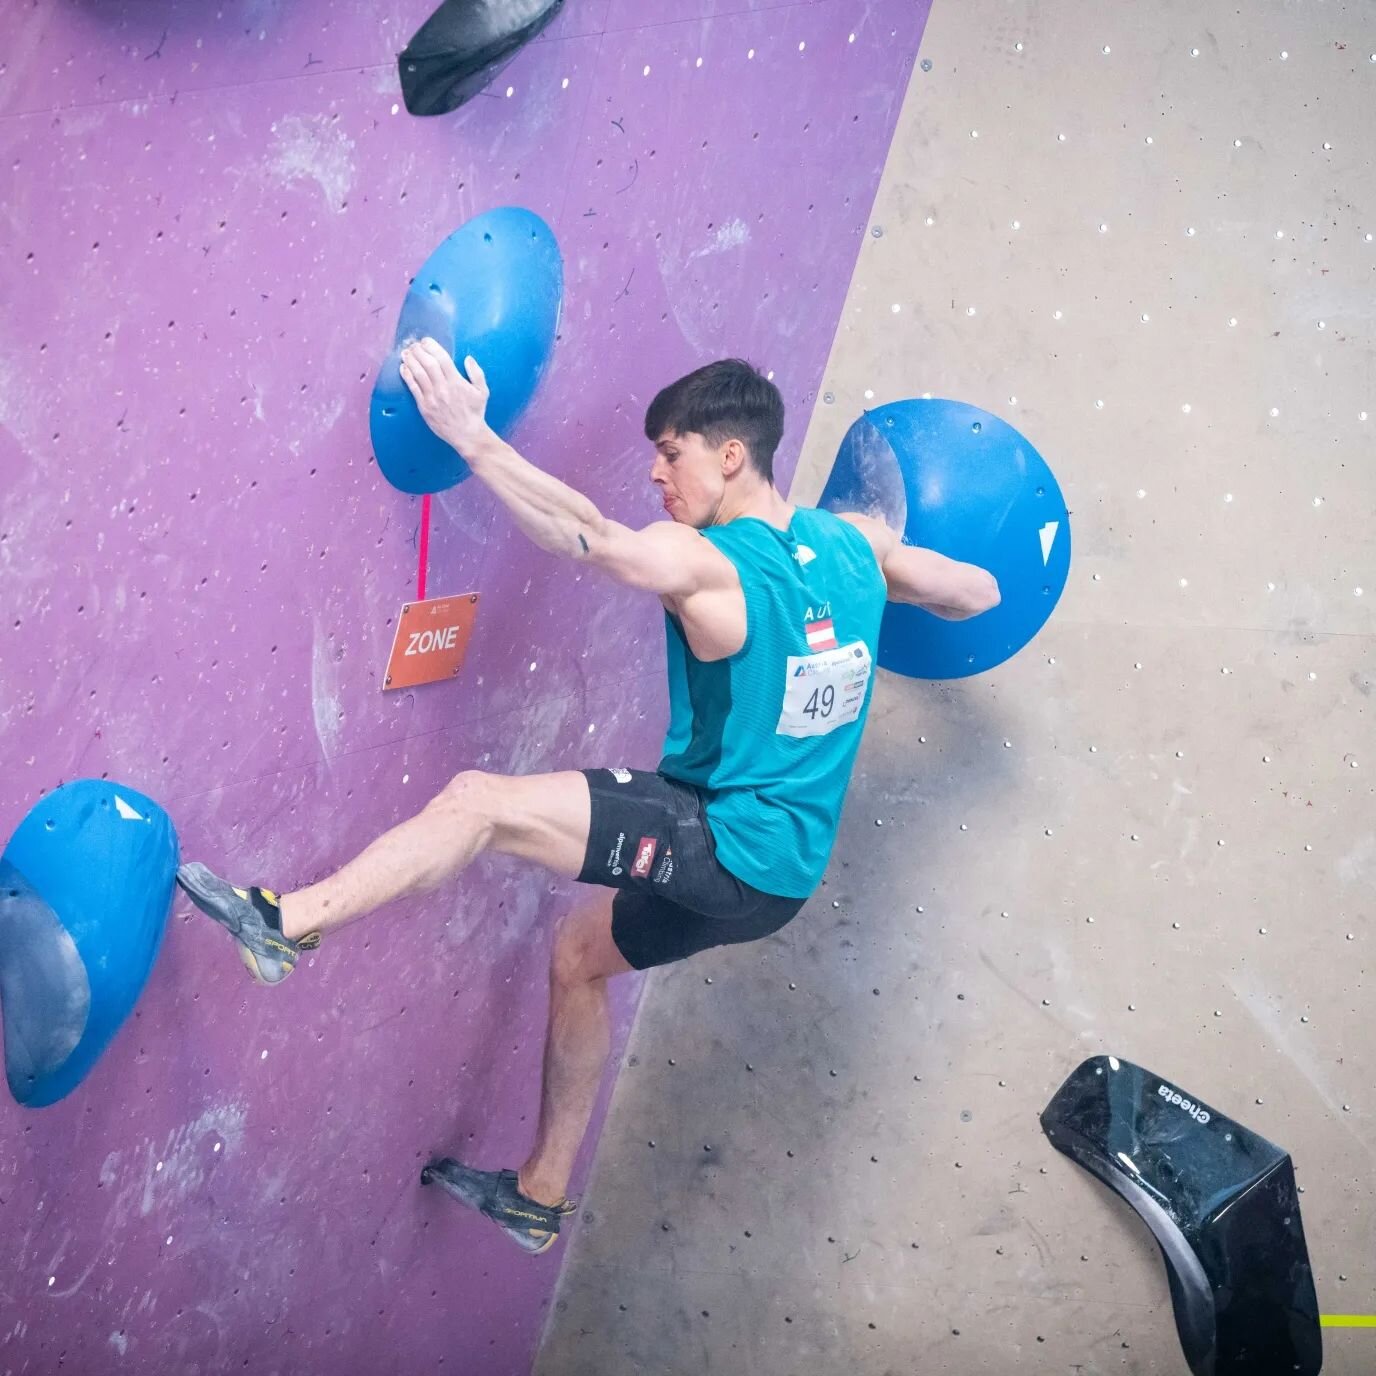 Austrian Championship in Bouldering this weekend. A little out of my comfort zone as I am preparing towards the lead season. Had a really good quali round but semis was a bit too much of funky moves and no tecture holds for me (picture two for refere